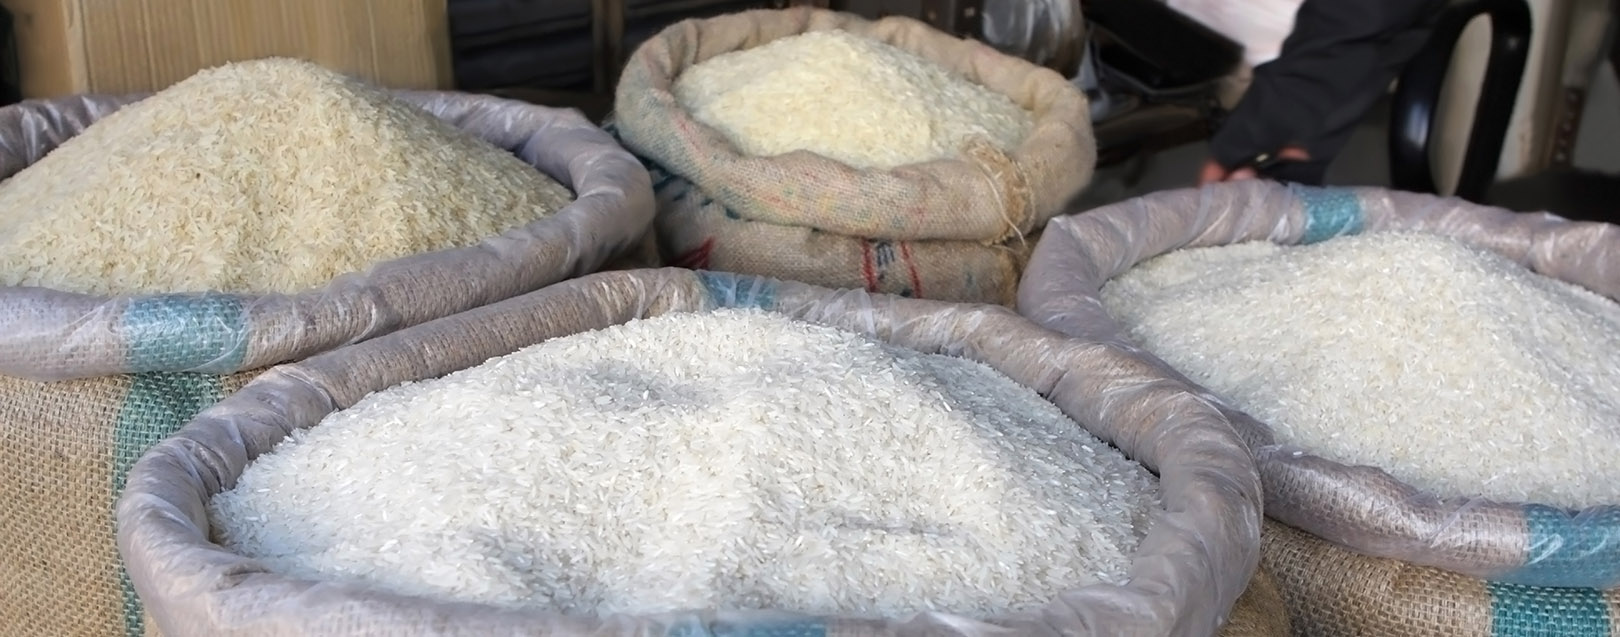 China lifts restrictions on imports of non-basmati rice from India